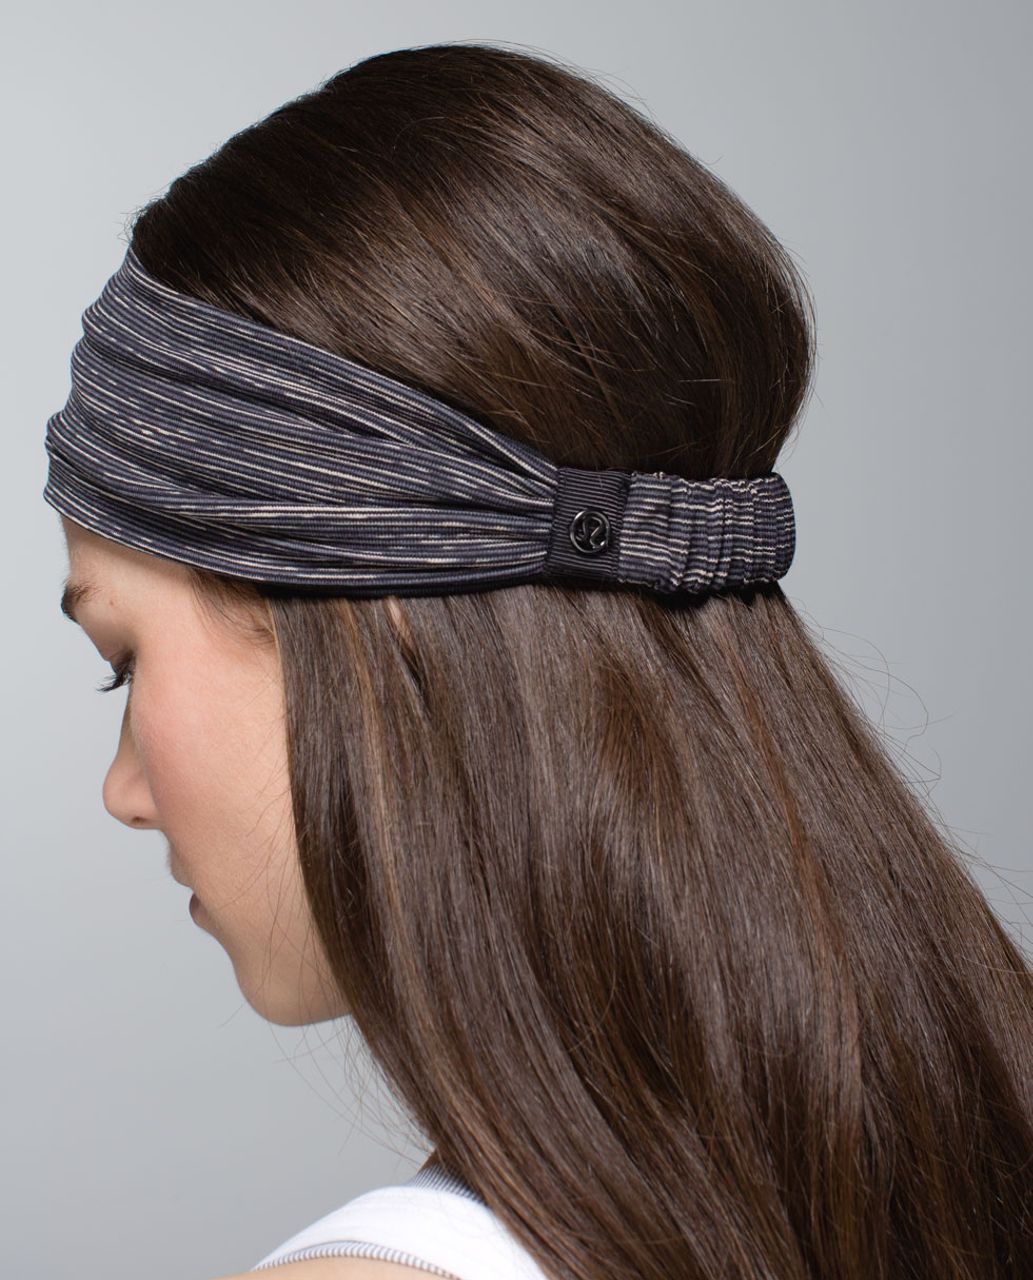 Lululemon Bang Buster Headband *Reversible - Wee Are From Space Black Cashew / Black